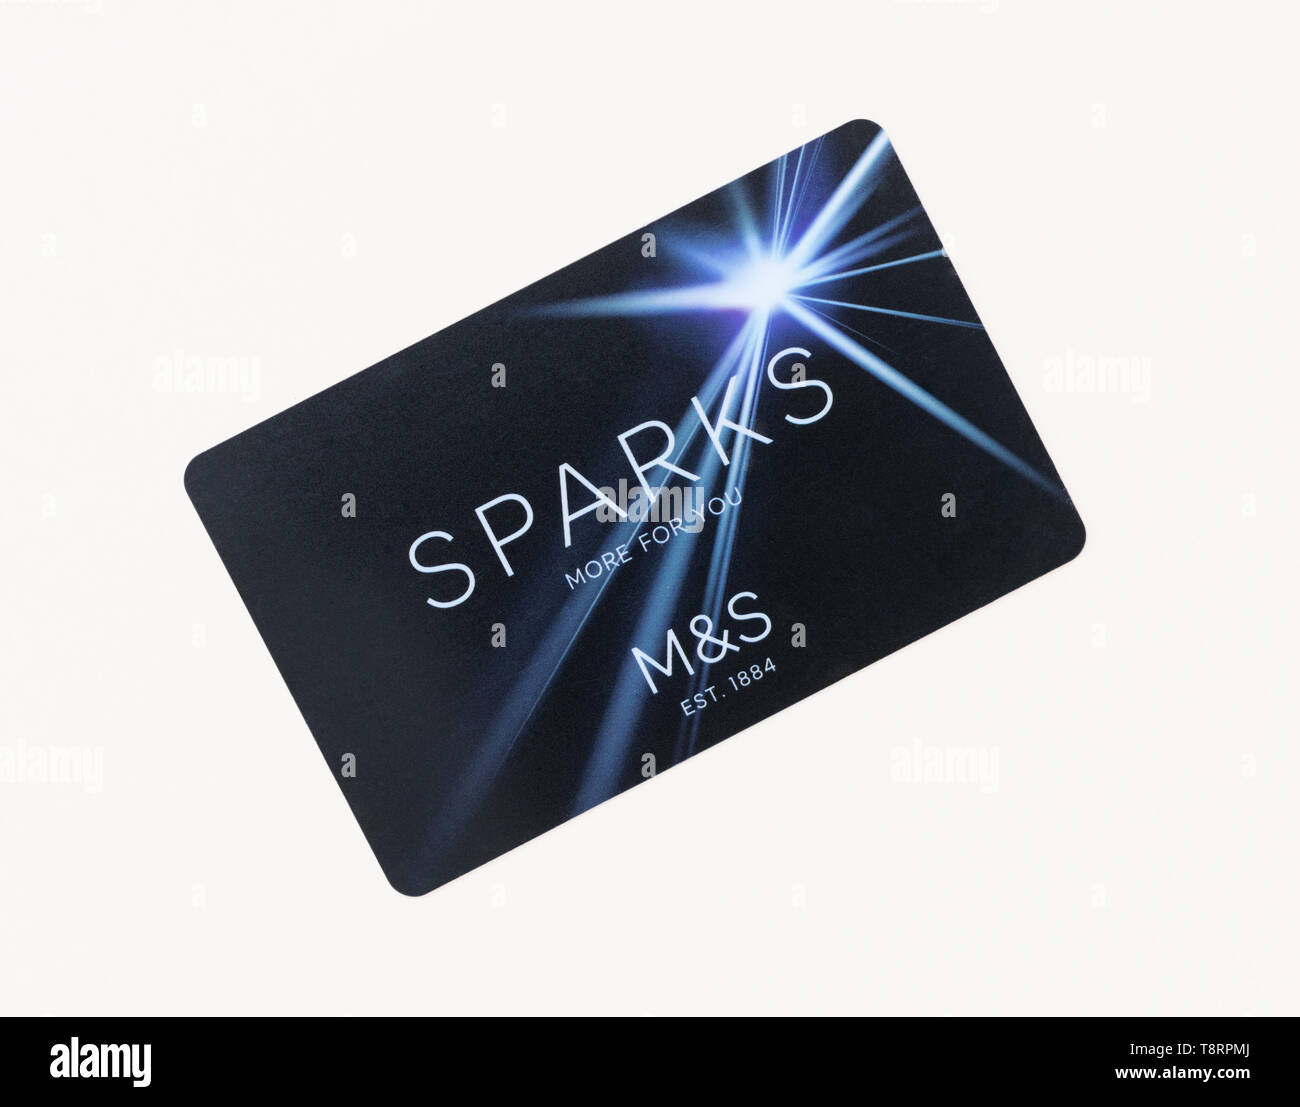 London, UK - 14th May 2019 - Marks and Spencer sparks loyalty card isolated on a white background Stock Photo